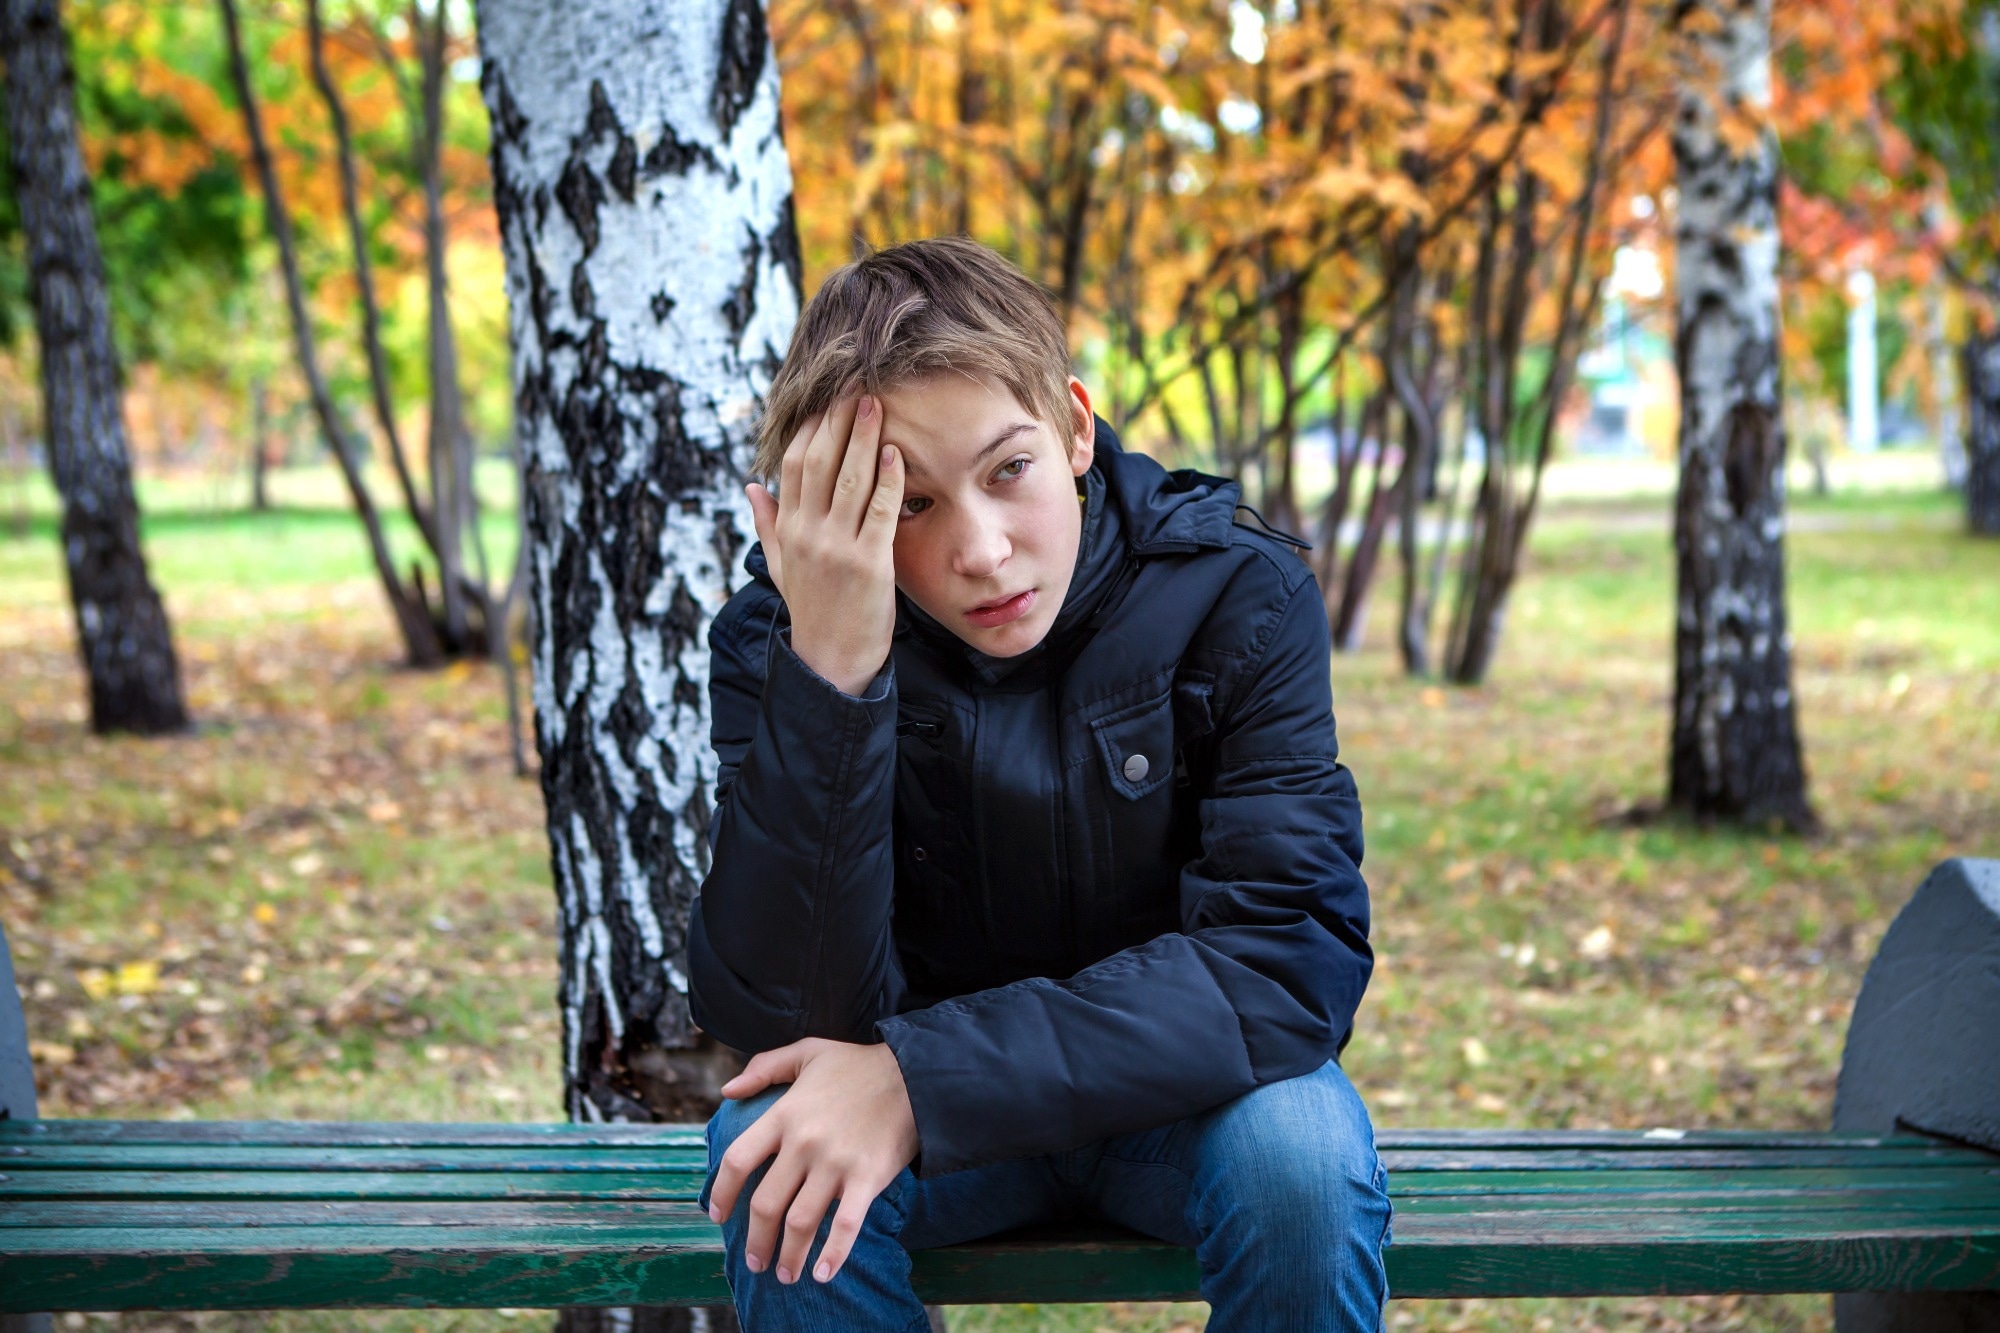 Study: Experiences of Unstable Housing Among High School Students — Youth Risk Behavior Survey, United States, 2021. Image Credit: Sabphoto / Shutterstock.com